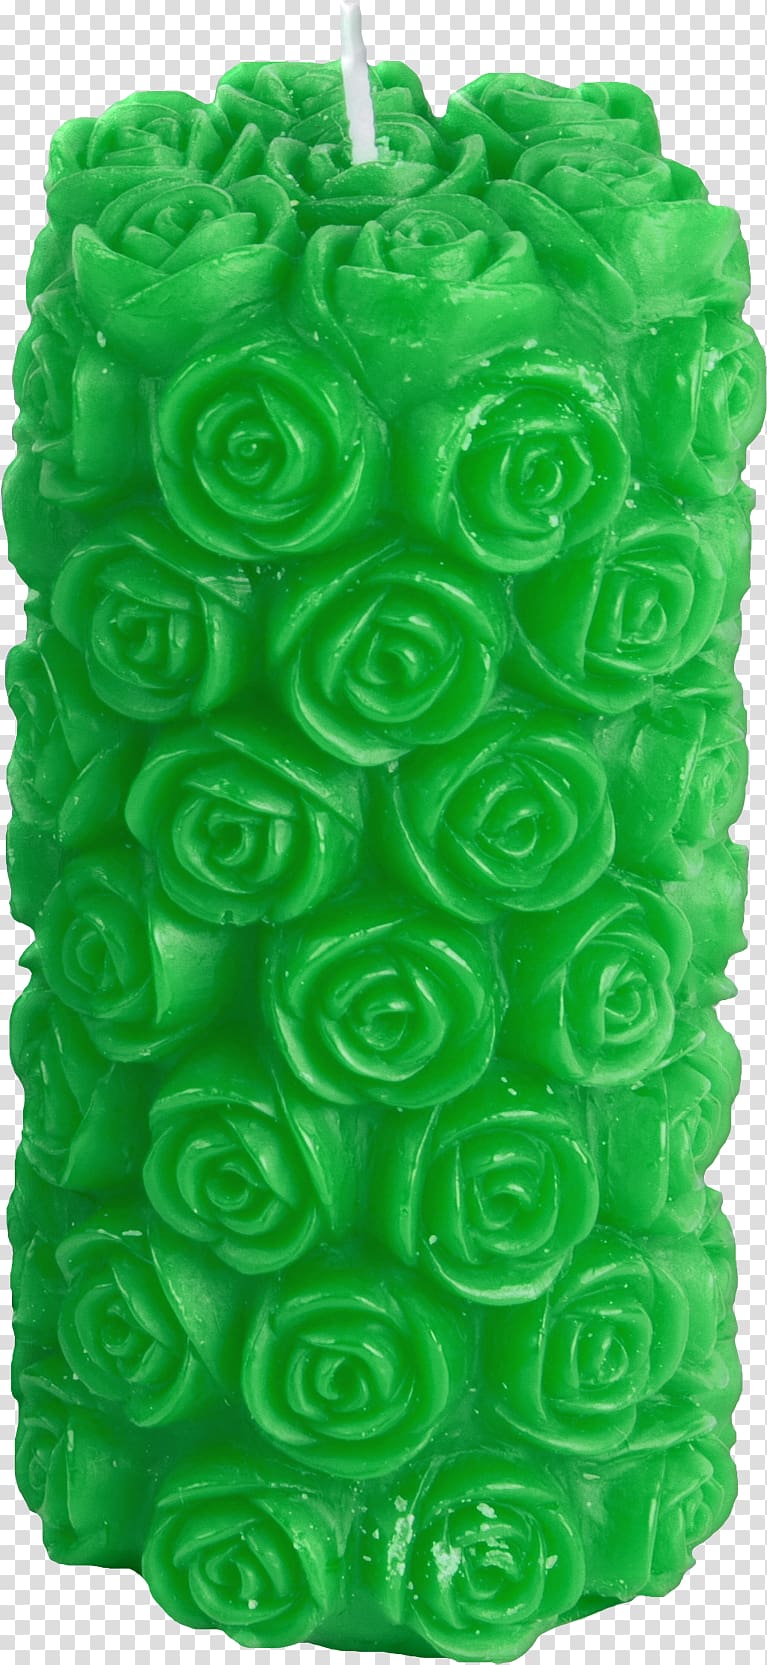 Ubon Ratchathani Candle Festival Beach rose Green, Green rose candle material free to pull transparent background PNG clipart